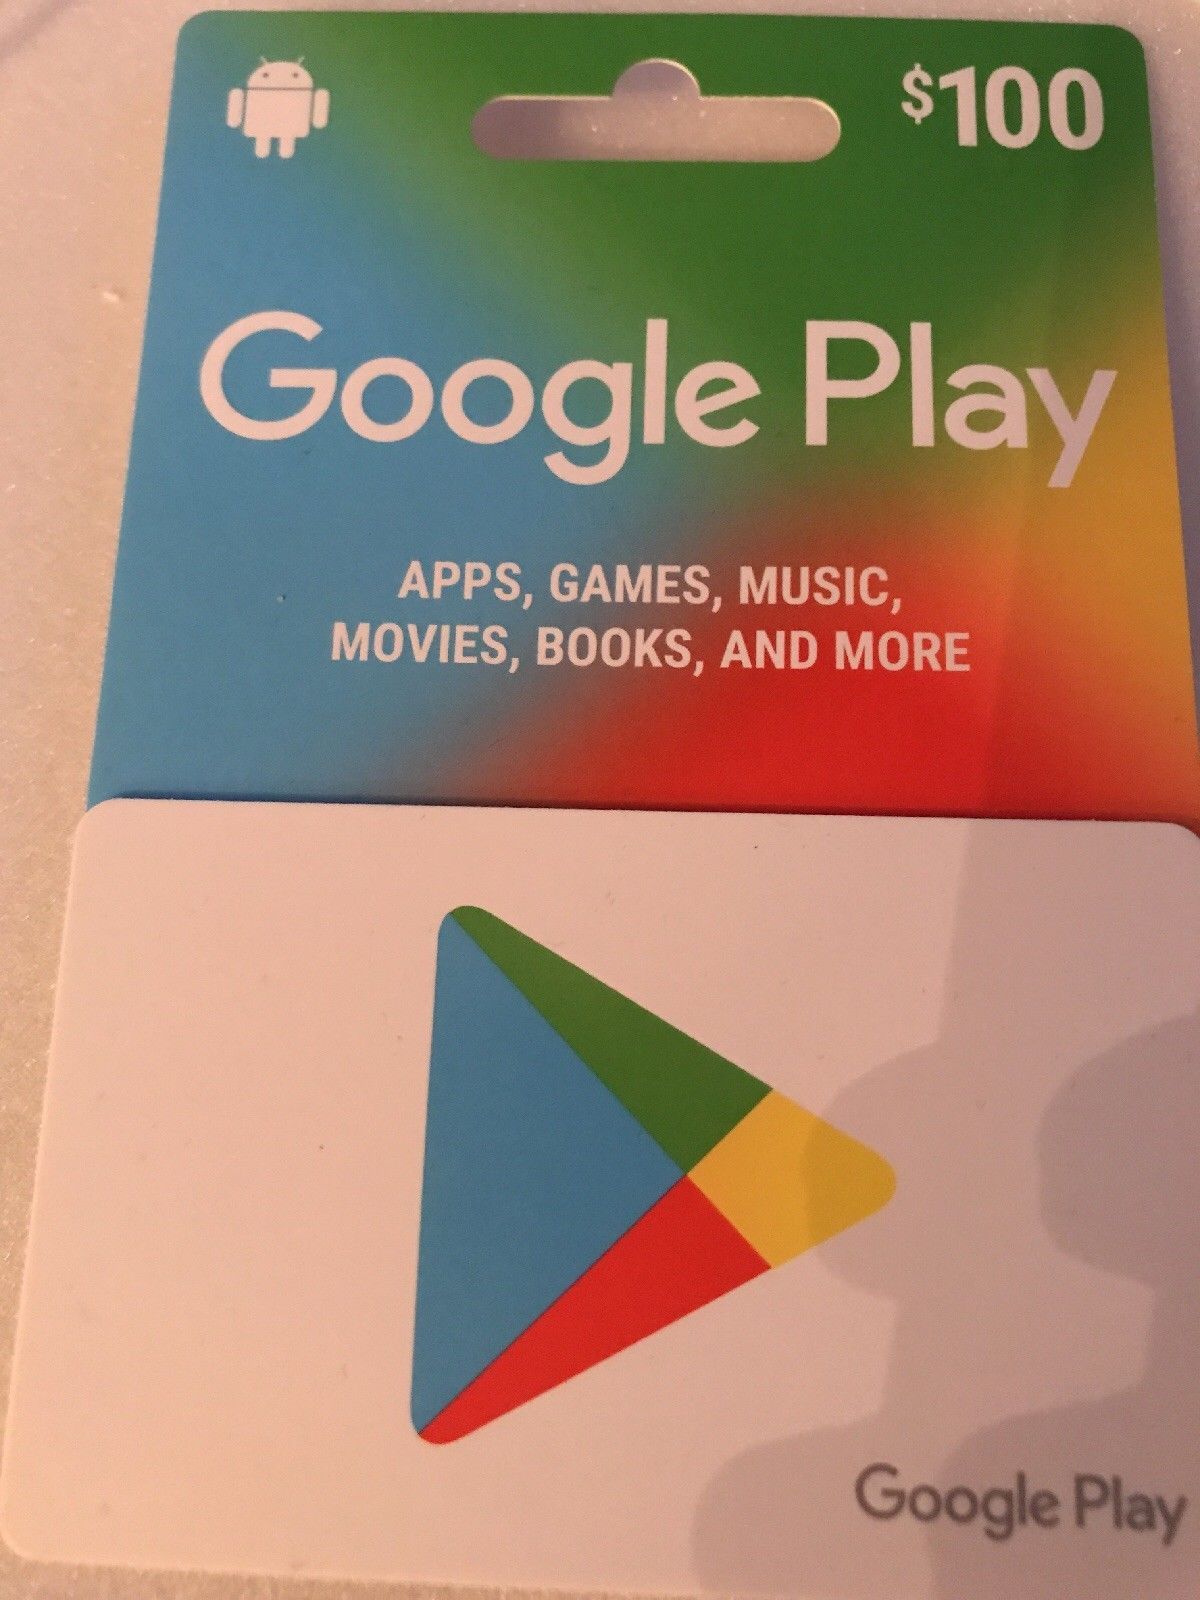 I can't Redeem the Google Play Gift Card it says 